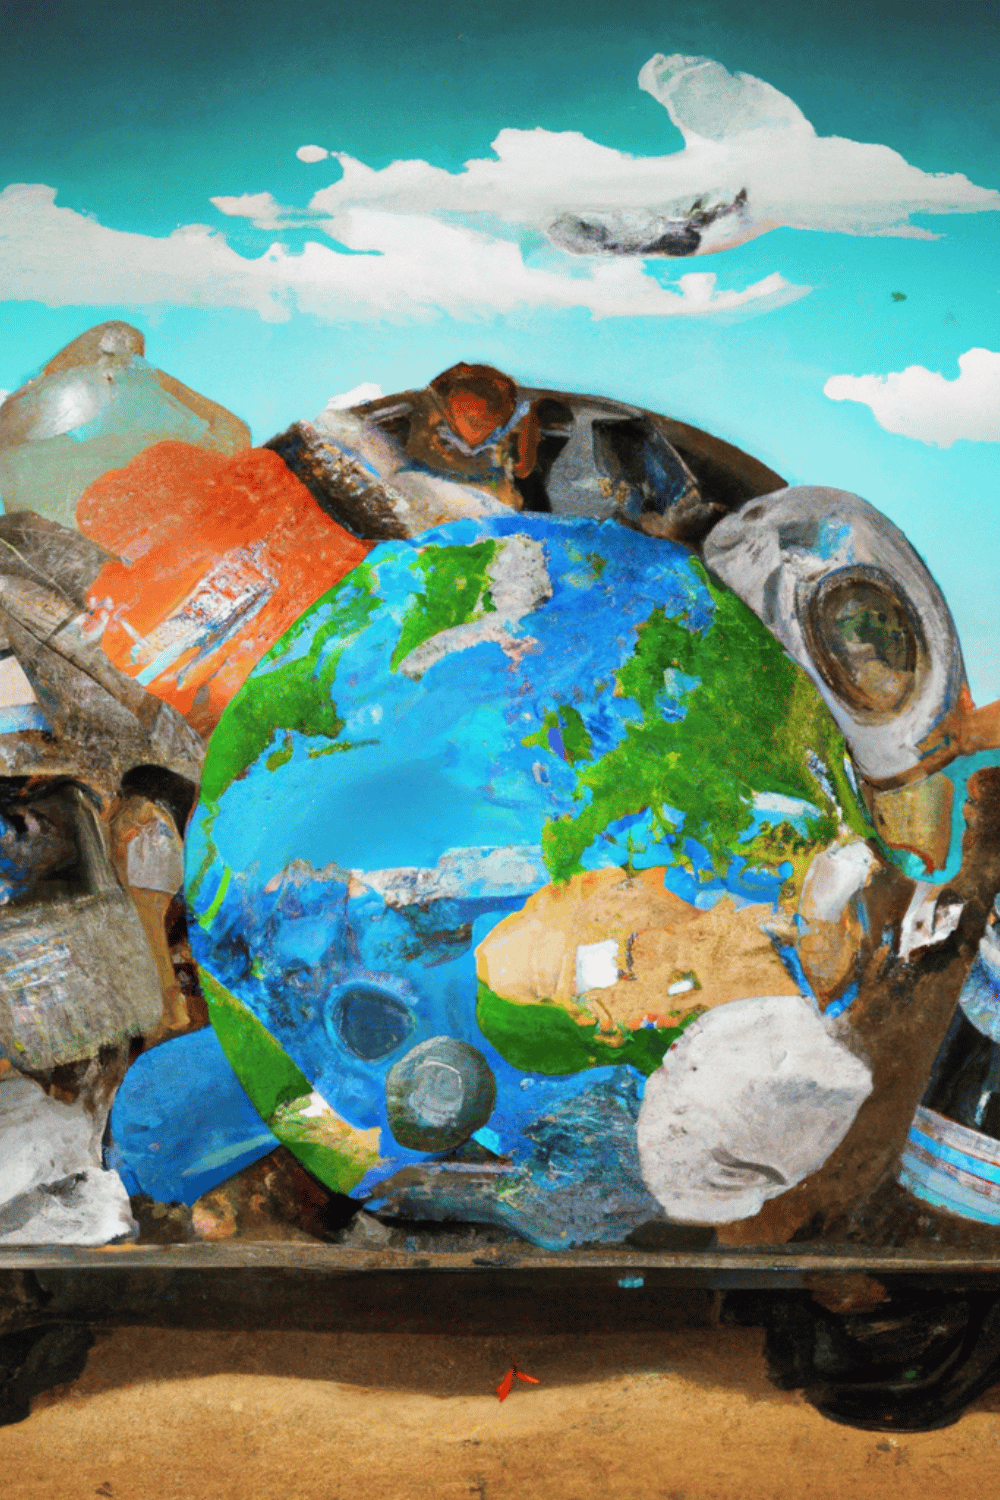 History of Recycling: 10 Concepts on the Journey From Trash to Treasure